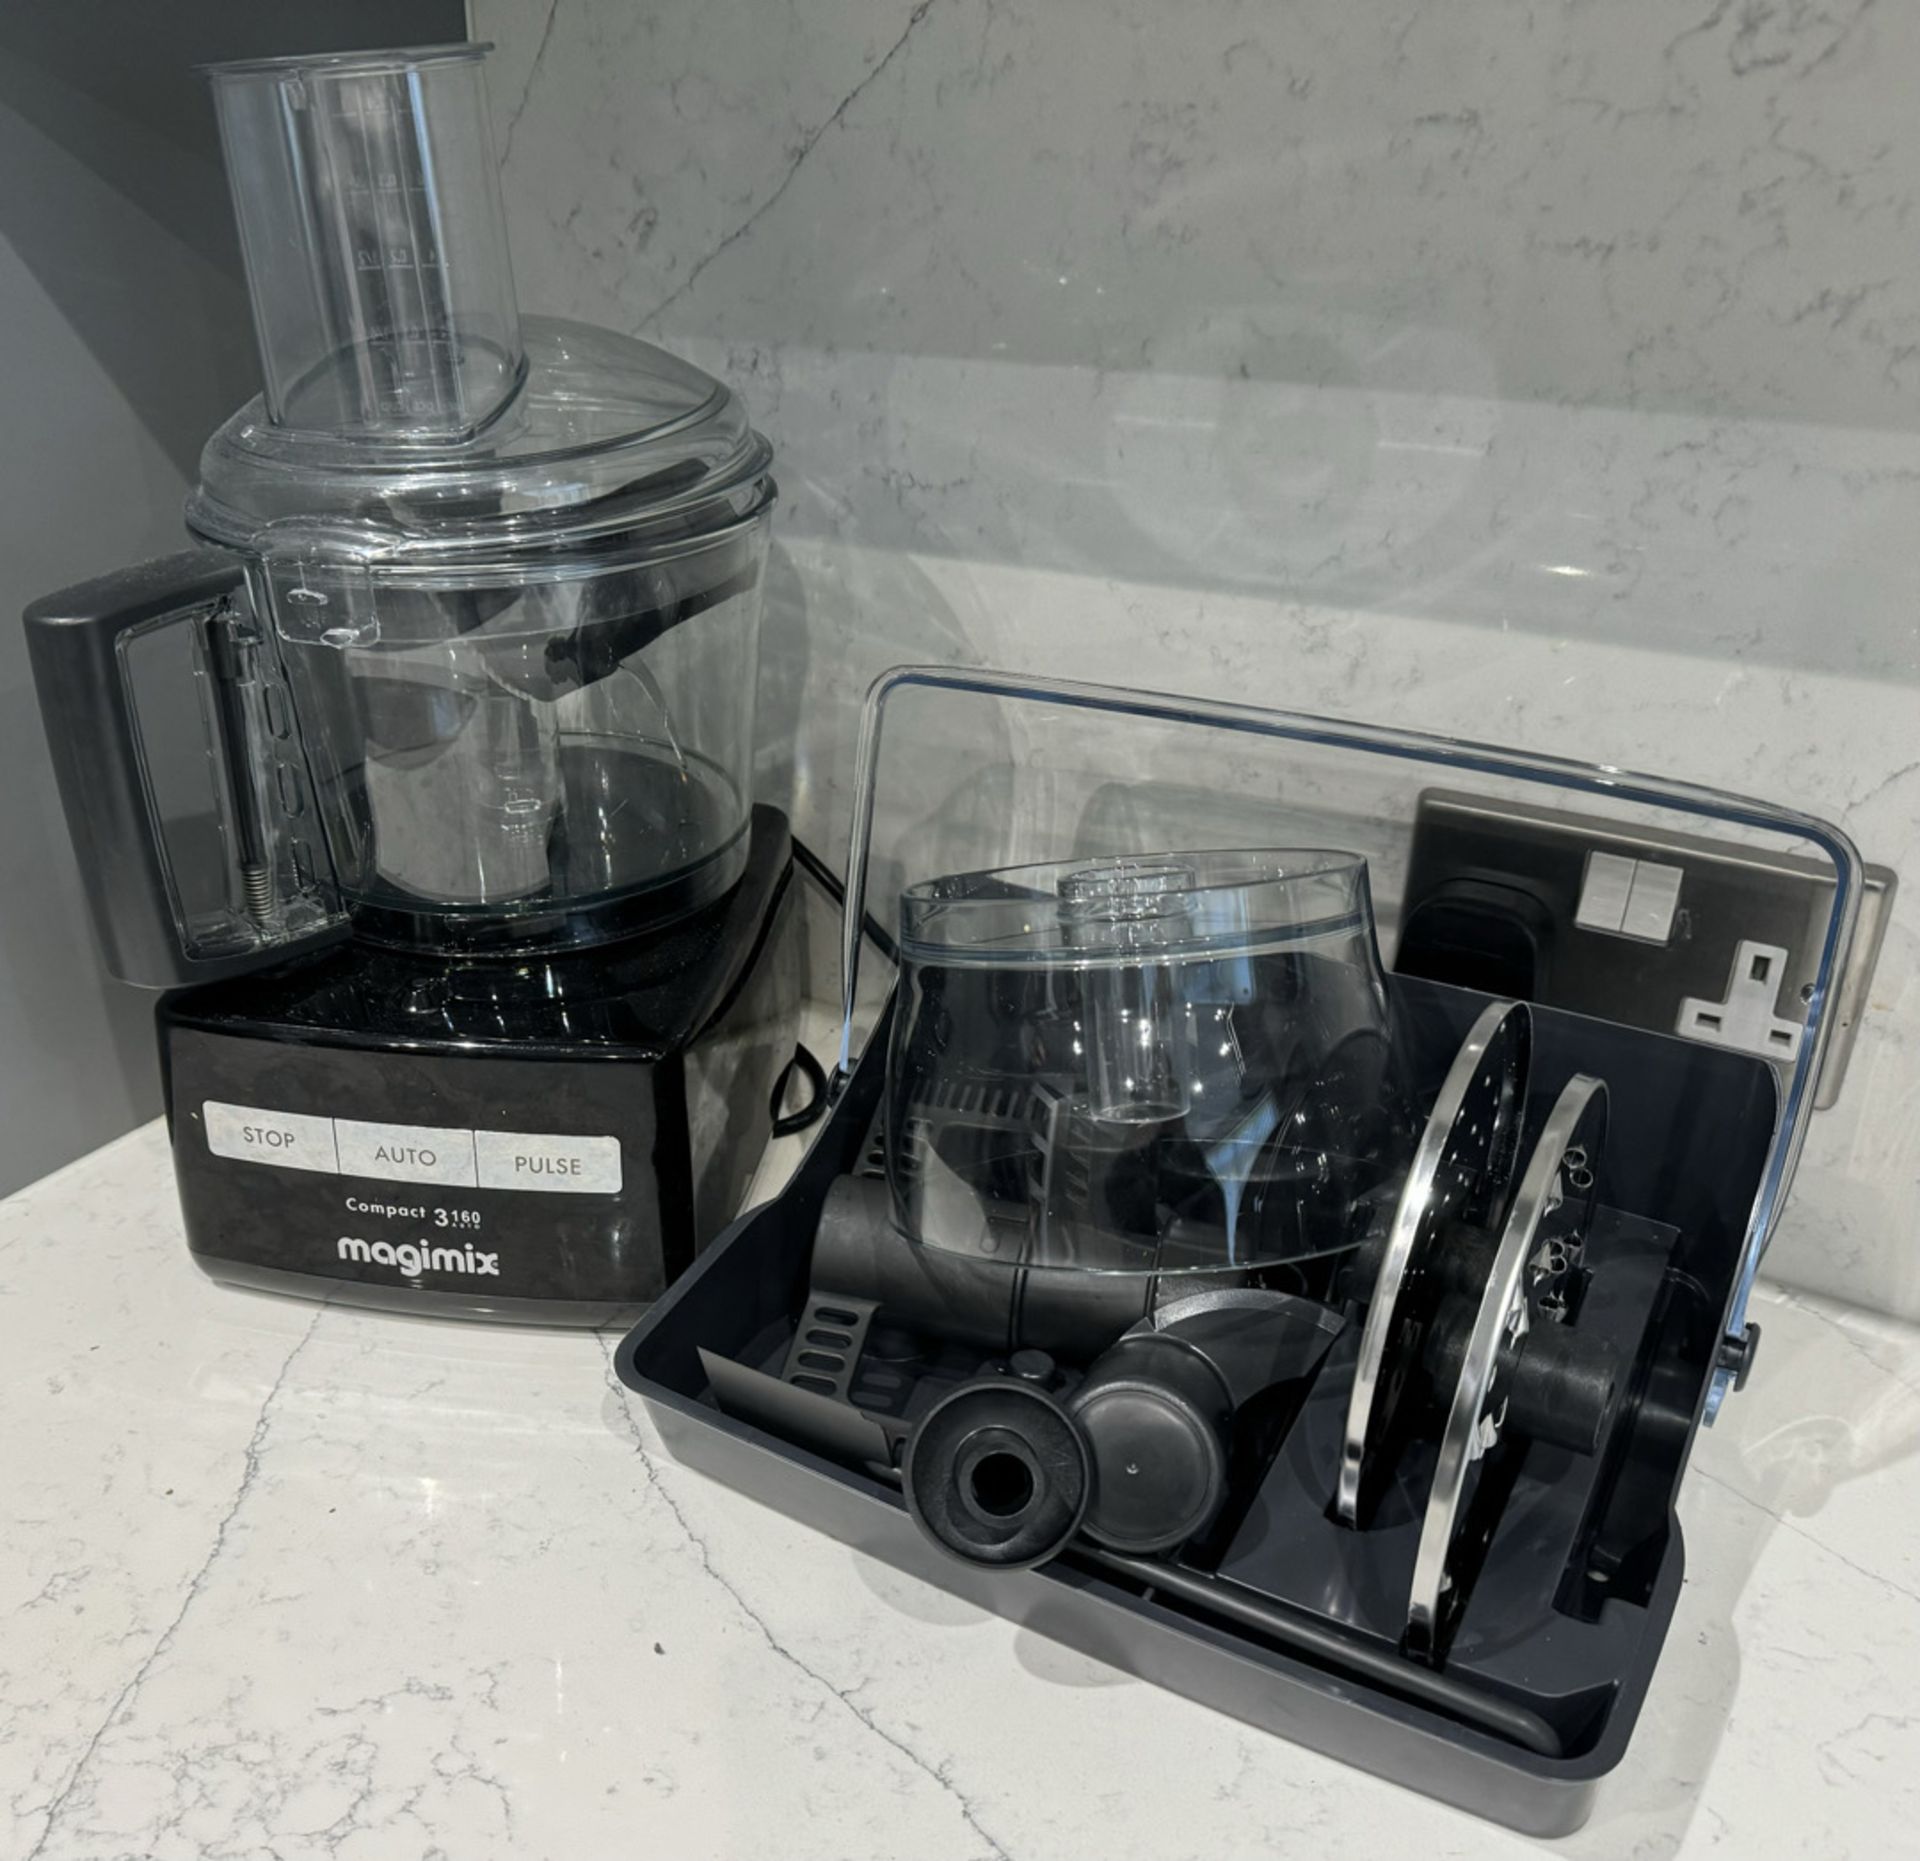 Magimix Compact 3160 Auto Food Processor with Accessories and Recipe Book - Black Model - NO VAT ! - Image 2 of 6